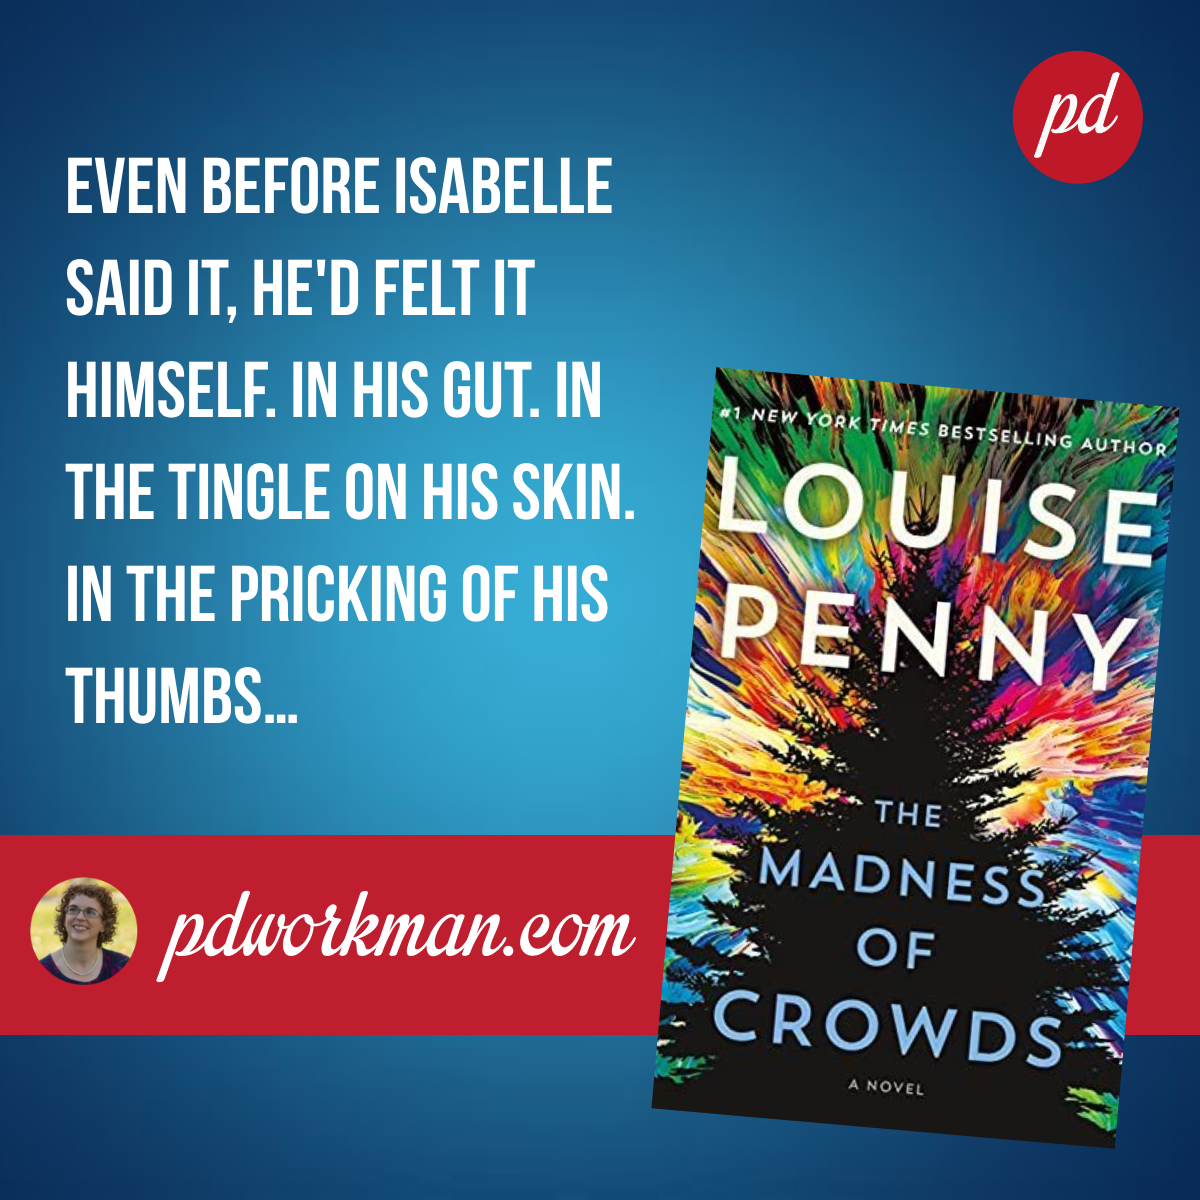 The Madness of Crowds,' by Louise Penny book revuew - The